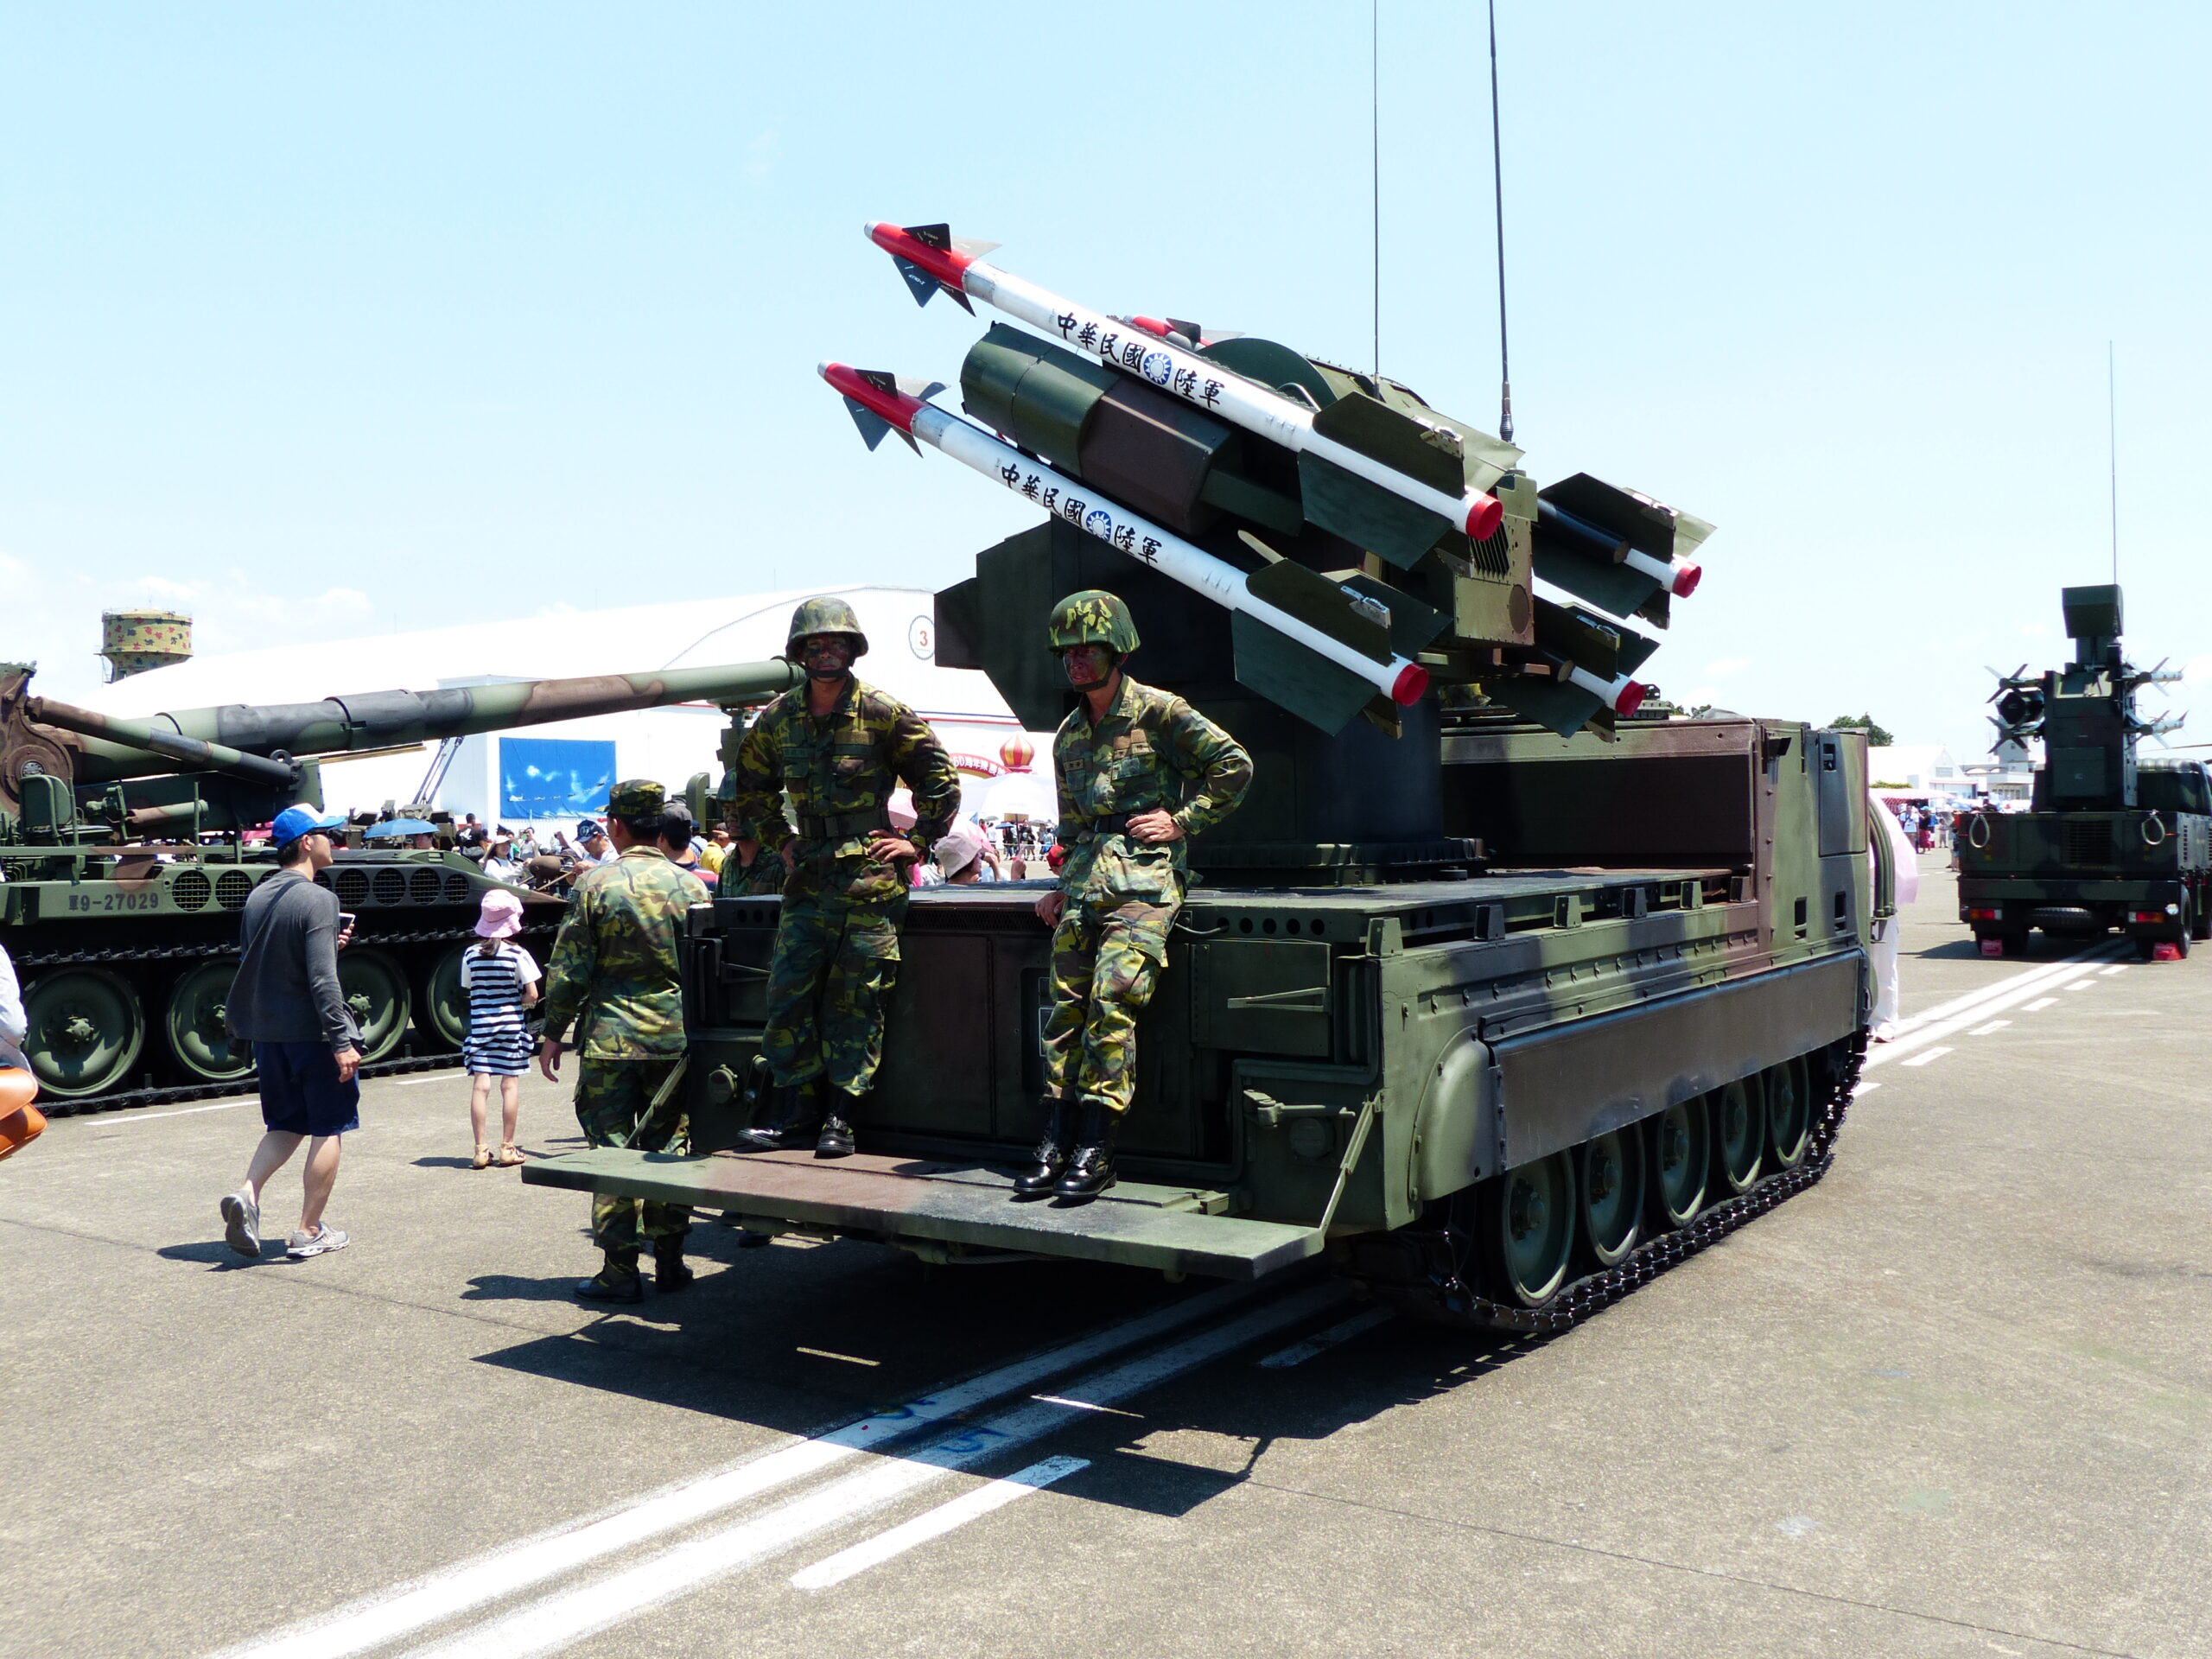 M730A1 Display at Tainan Air Force Base with Soldiers 20130810 by u7384u53f2u751f